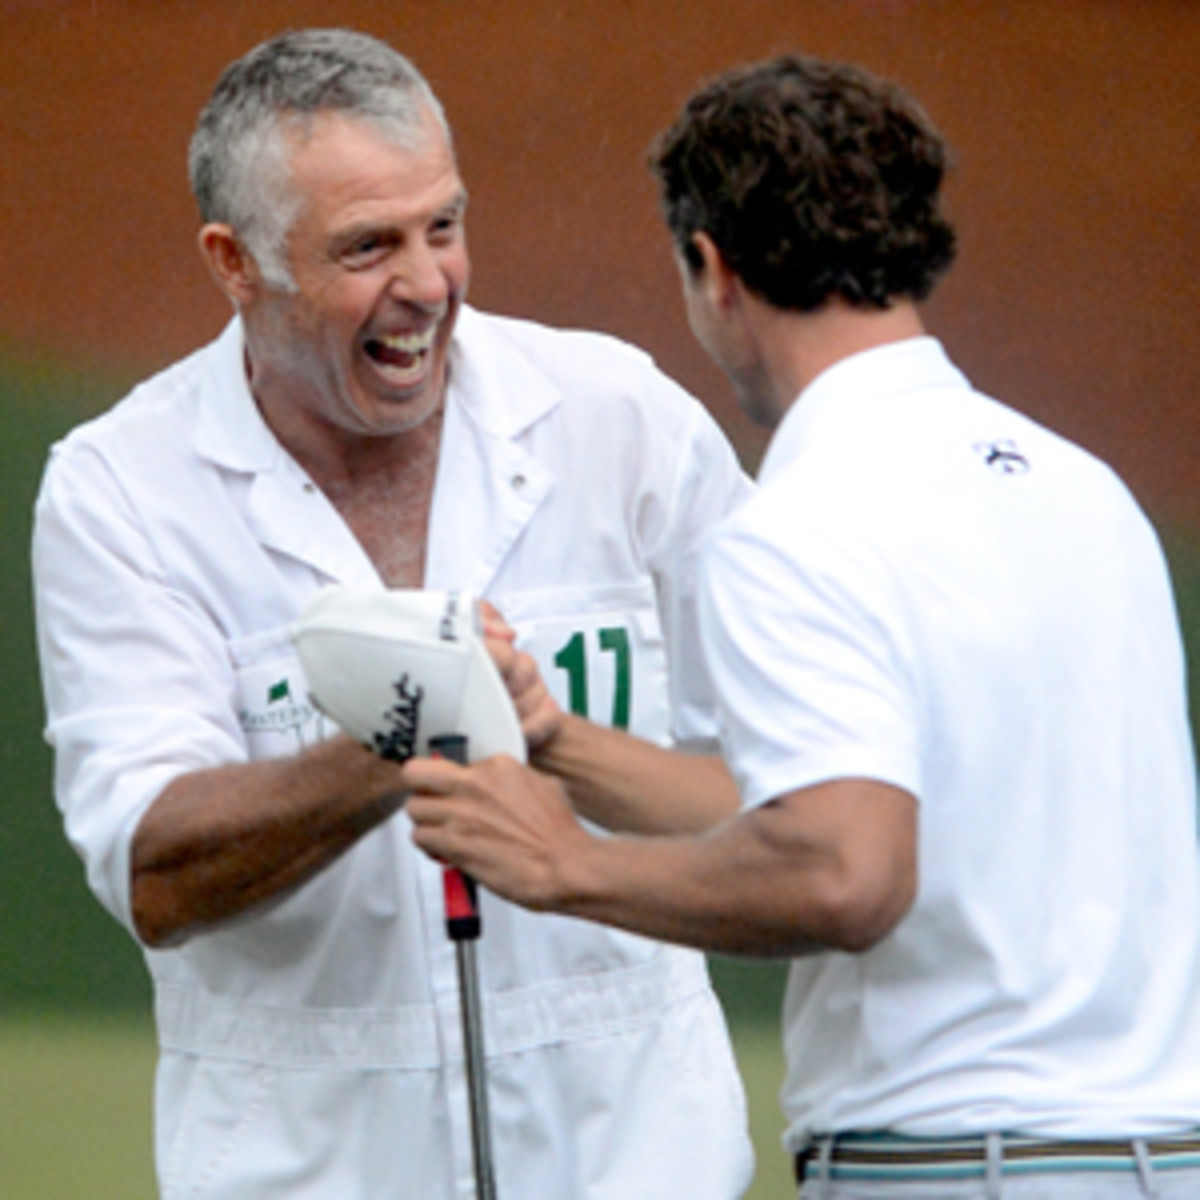 Steve Williams has now caddied for Tiger Woods and Adam Scott to Masters wins. (Getty Images)